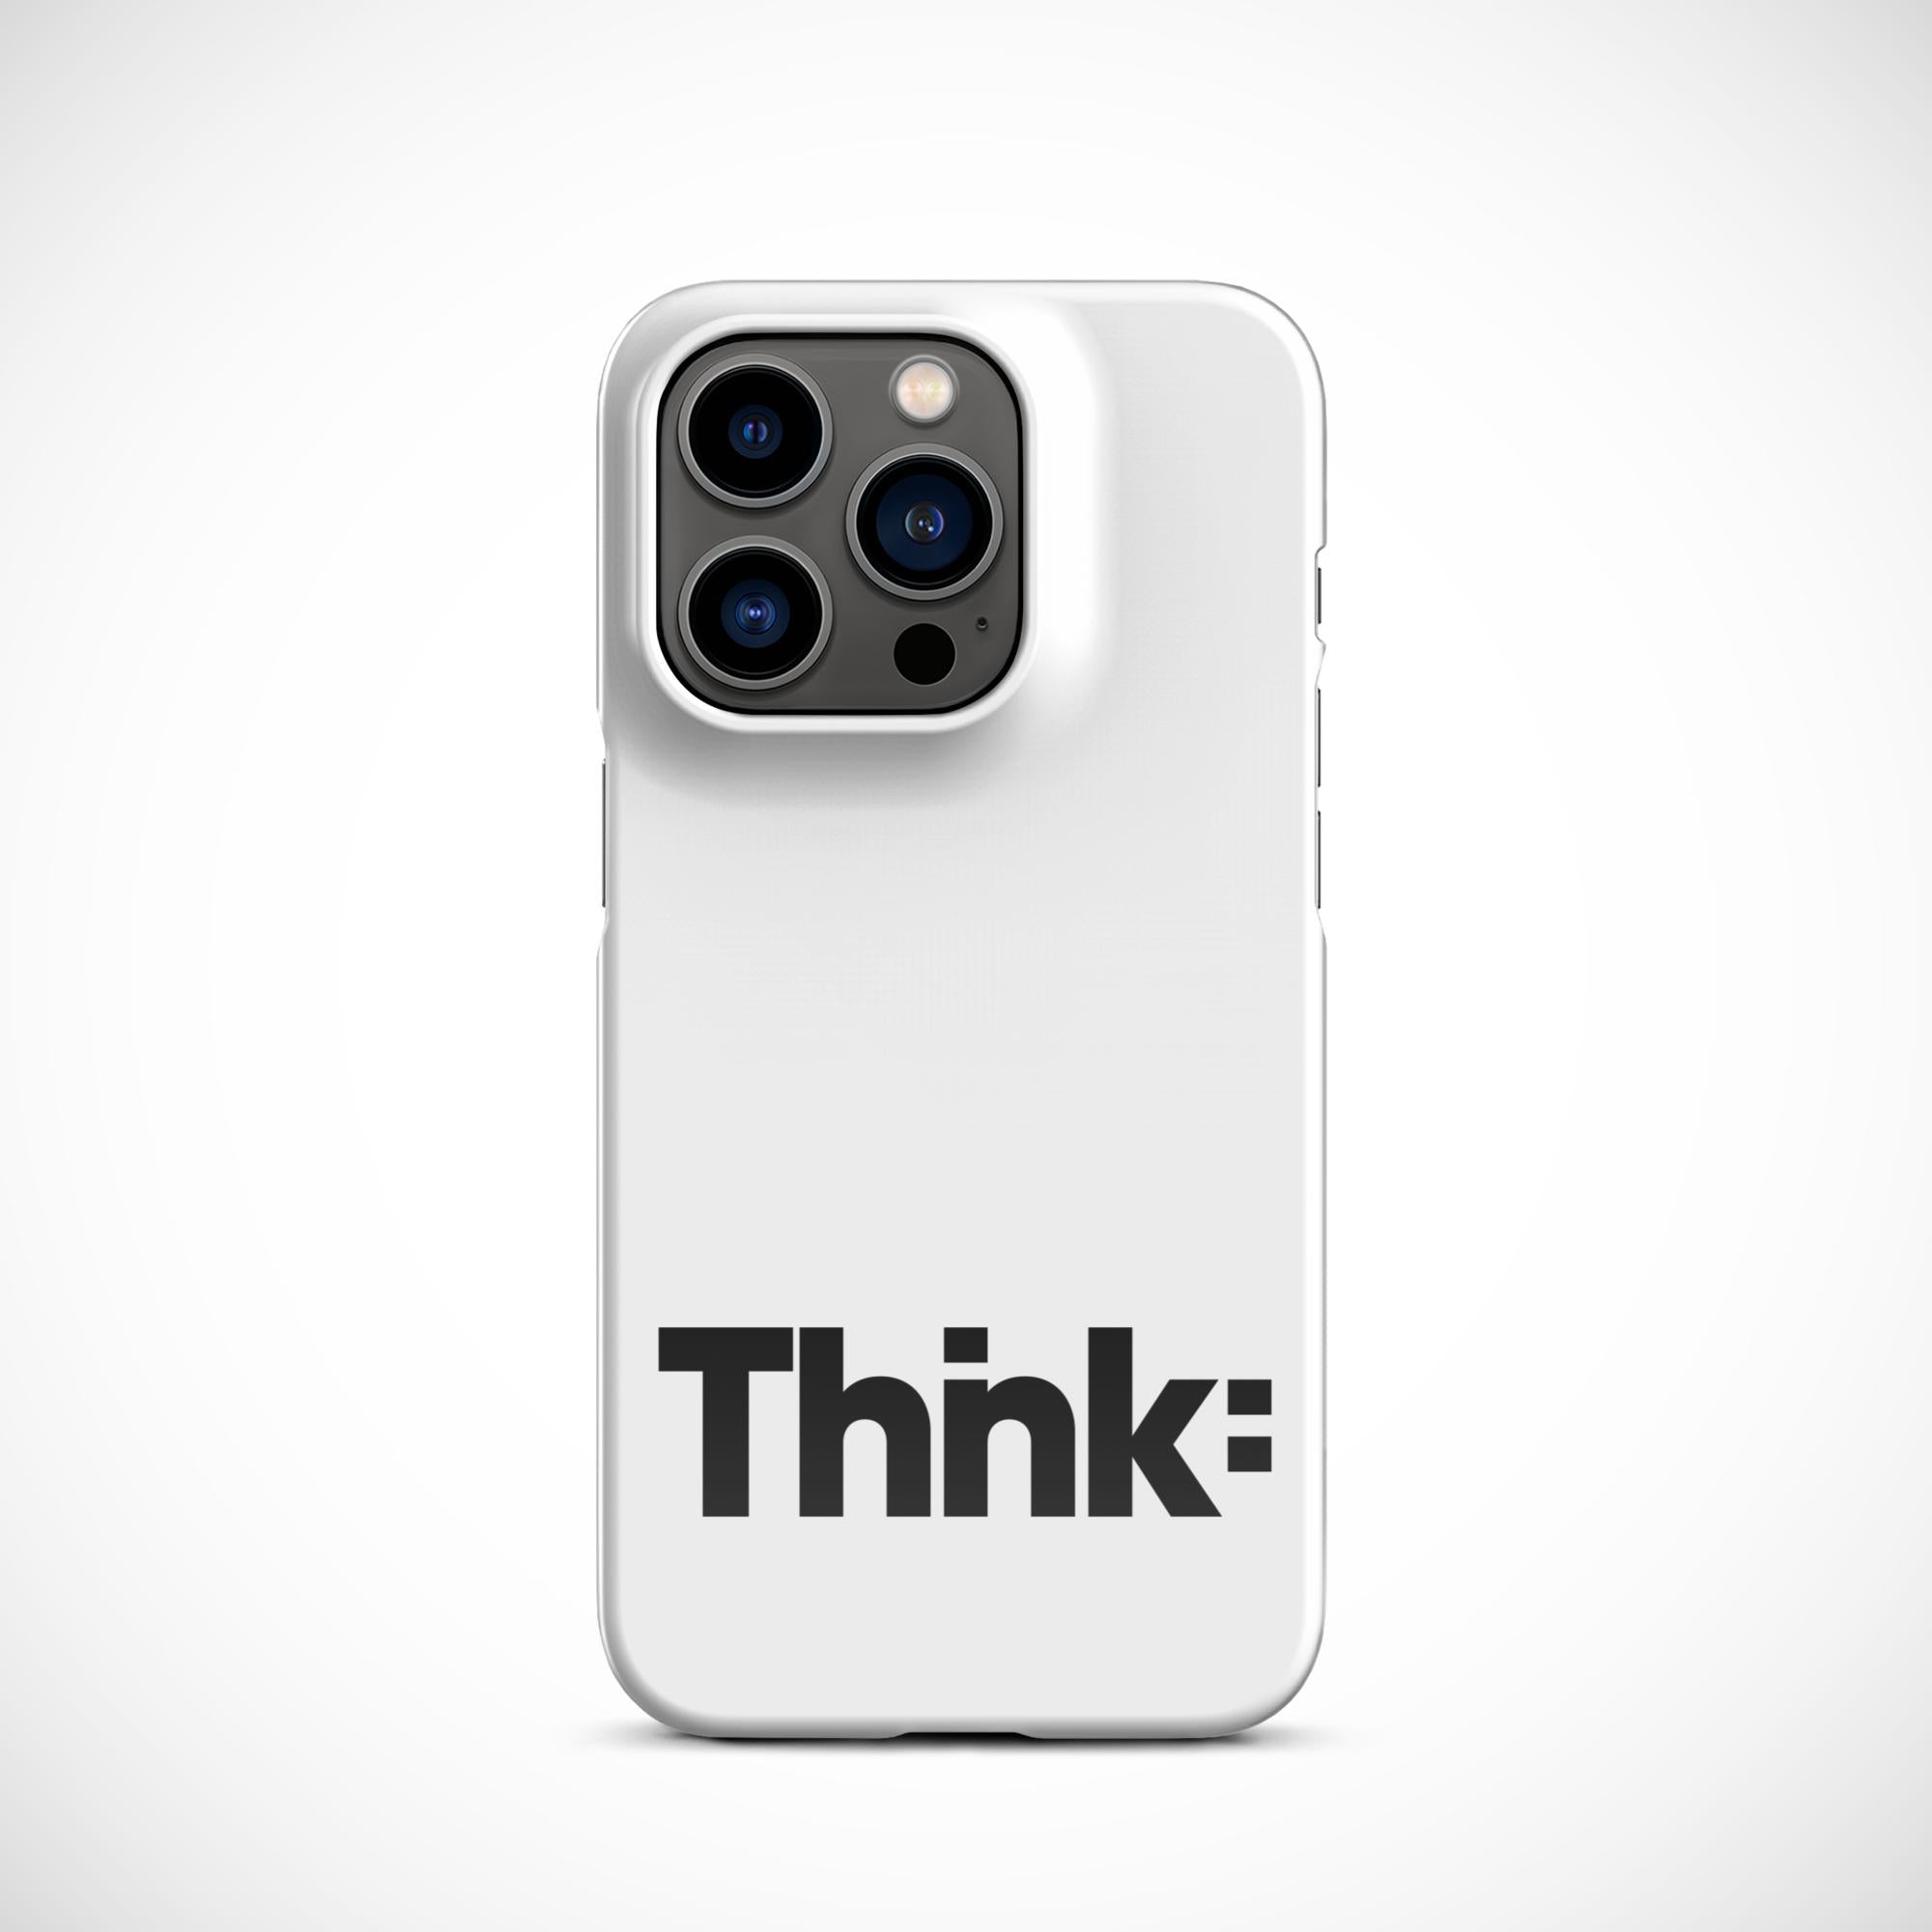 Thnk Case for iPhone®